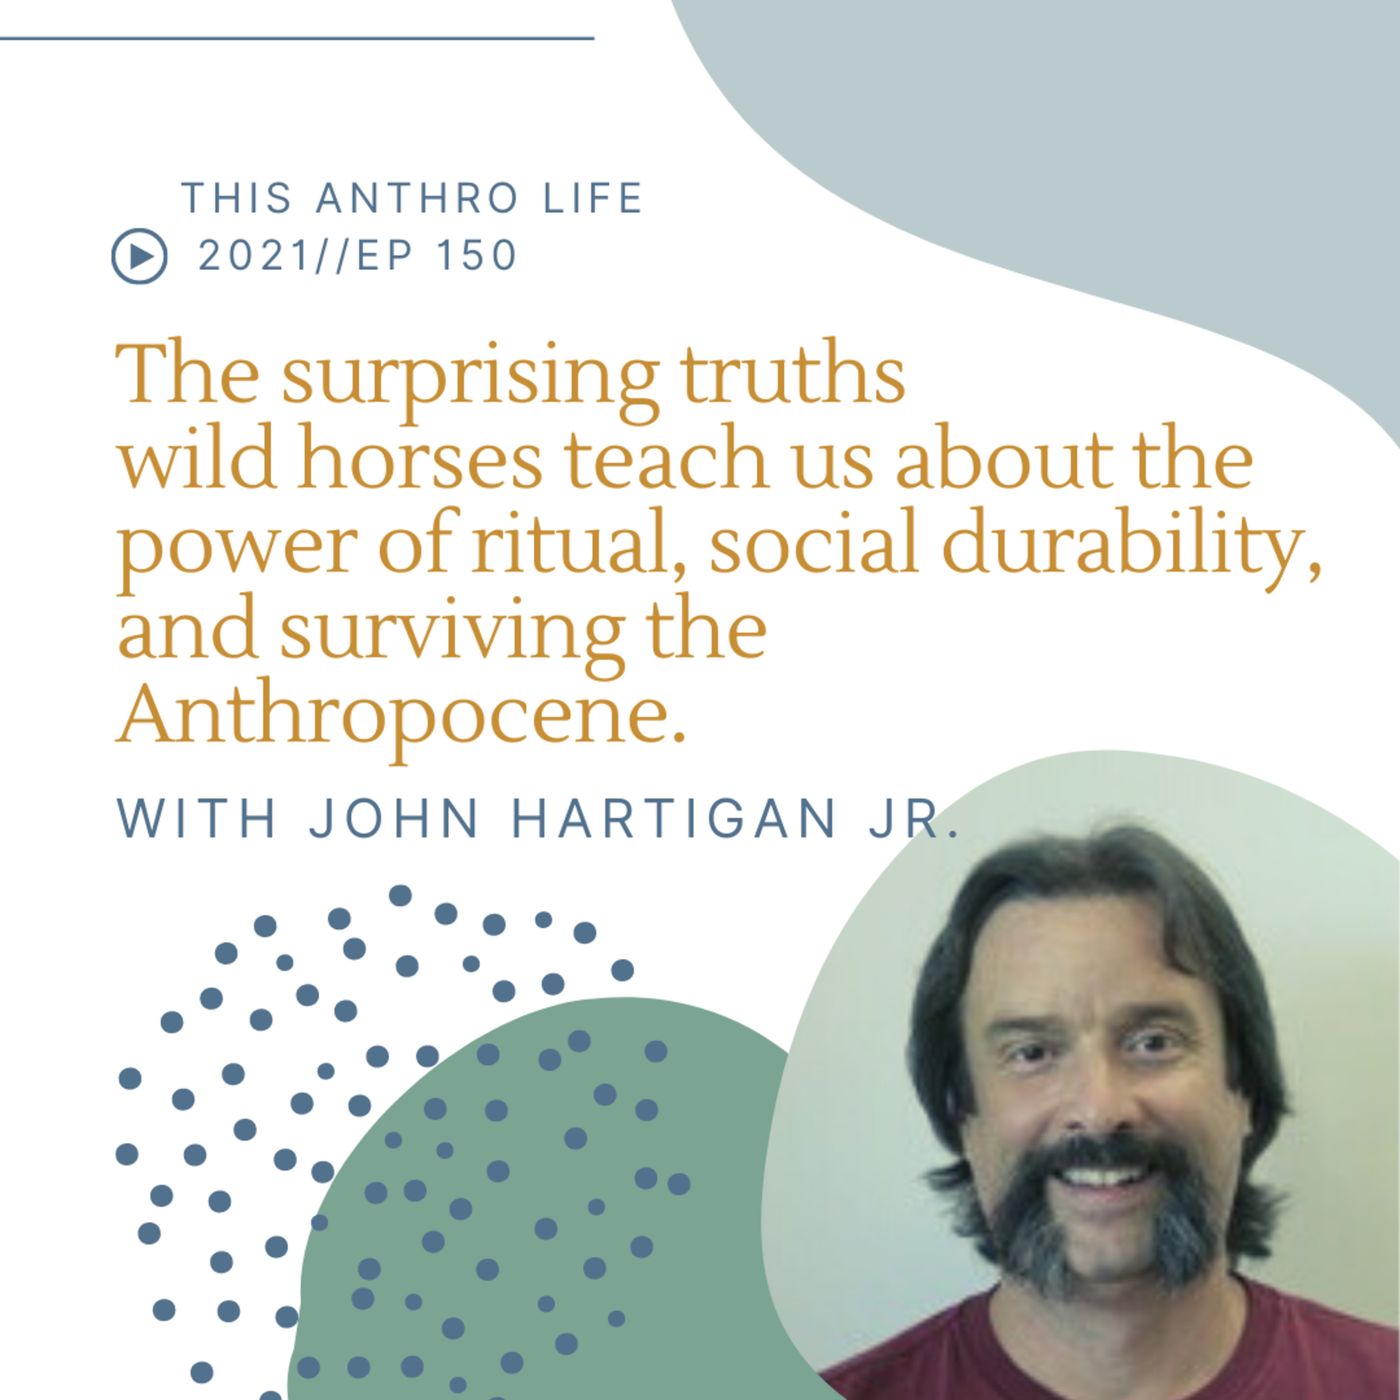 The surprising truths wild horses teach us about the power of ritual, social durability, and surviving the Anthropocene with John Hartigan J